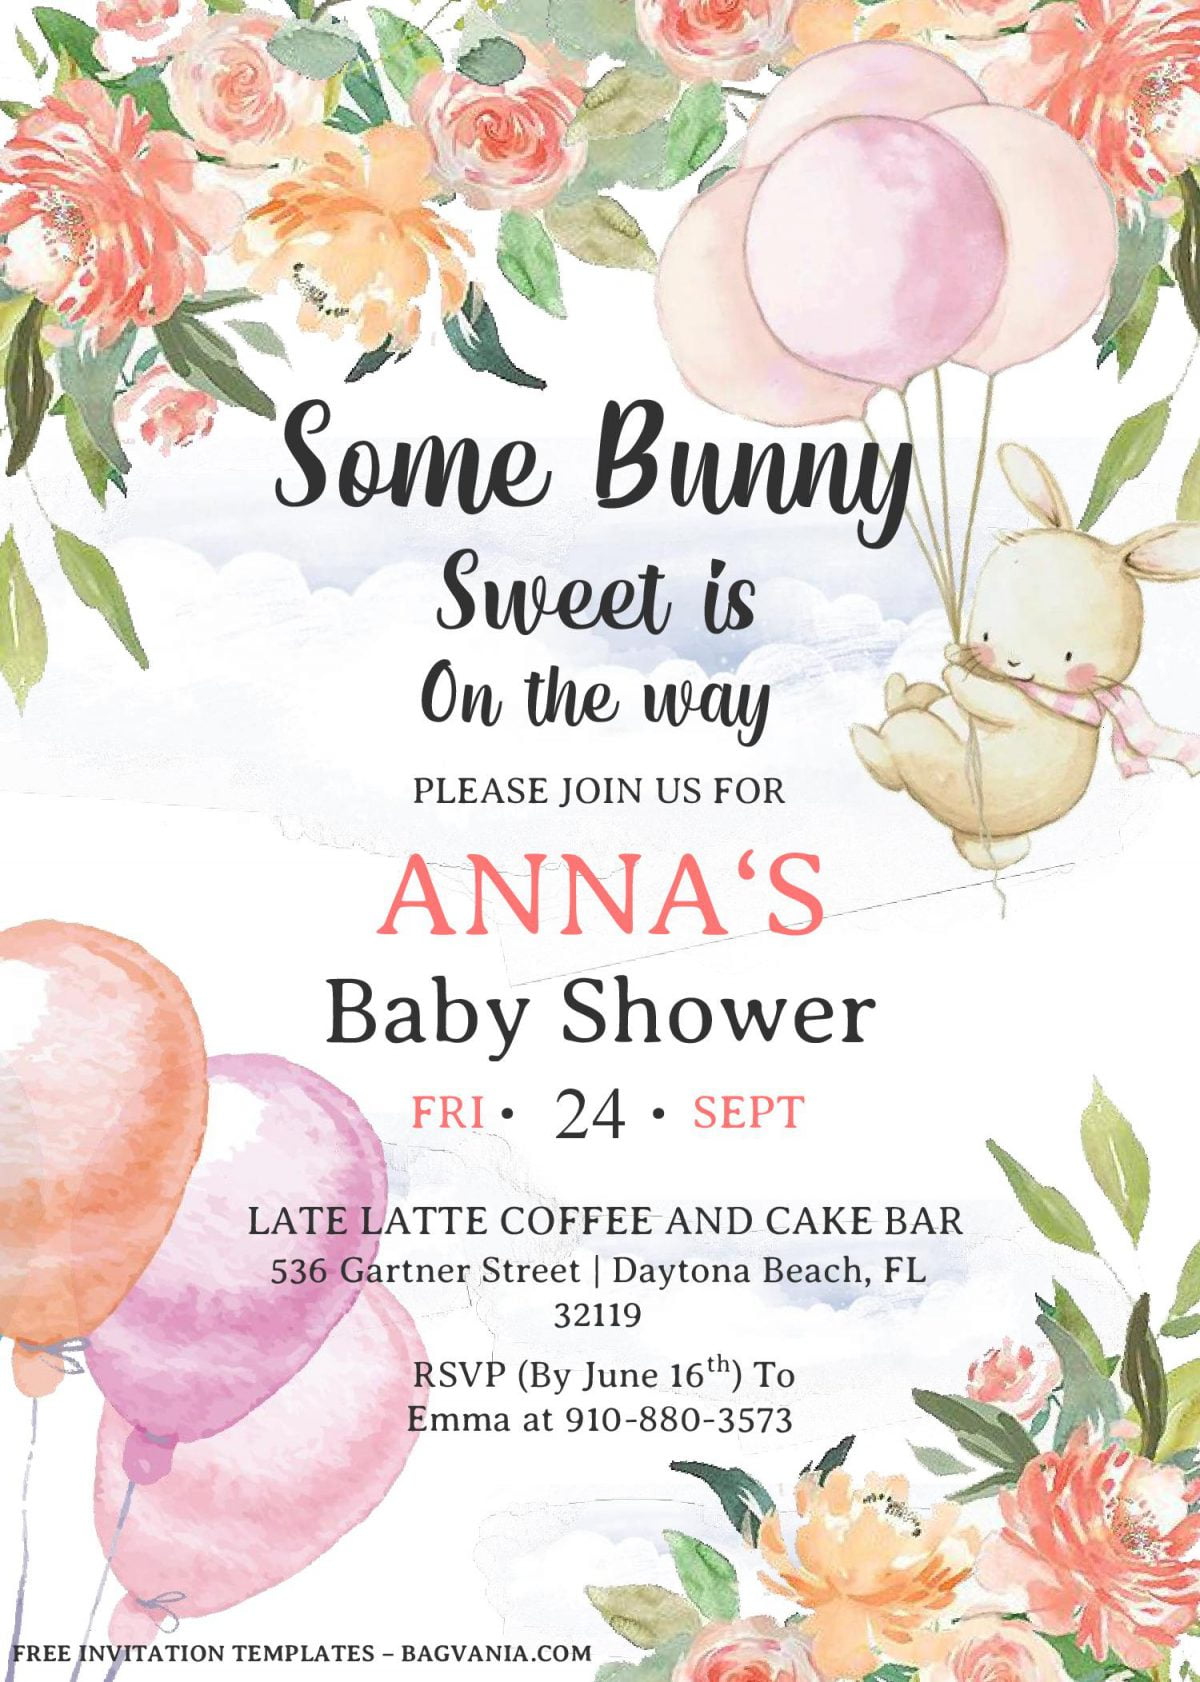 Some Bunny Invitation Templates - Editable With MS Word and has cute bunny holding balloons